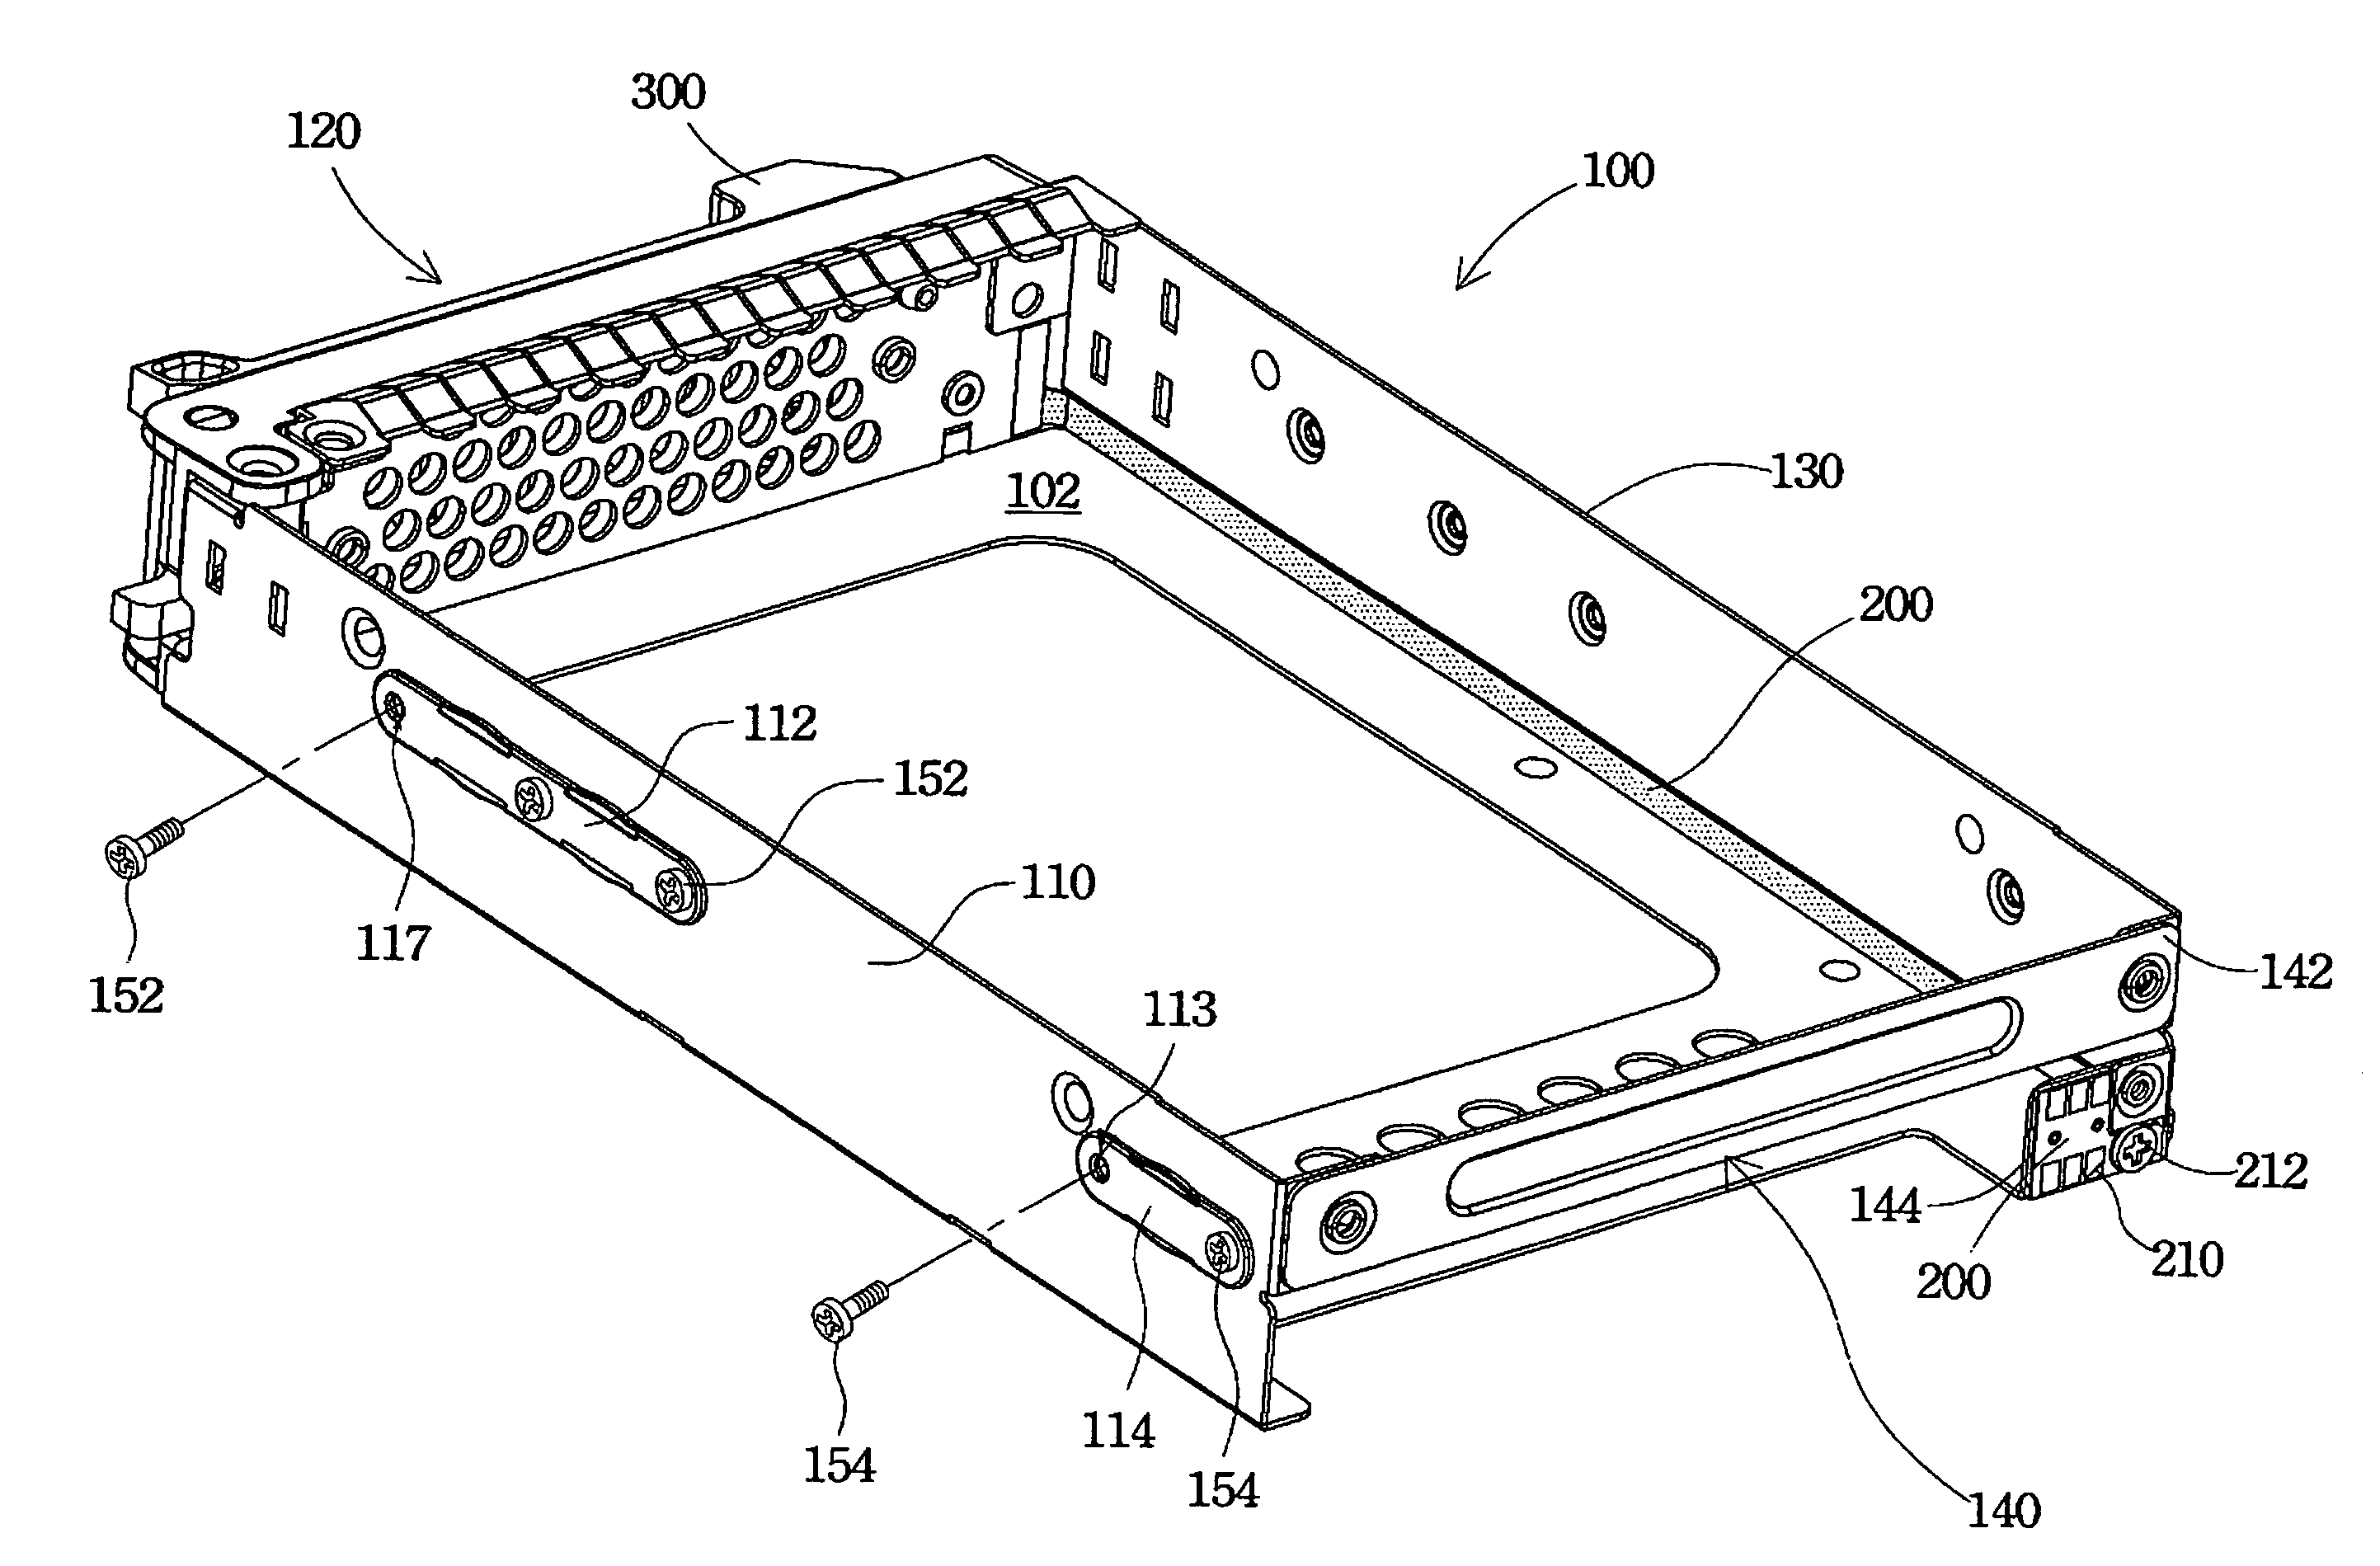 Hard disk drive tray structure with flex circuit extending between exposed sides and connected to metal pad and indicator